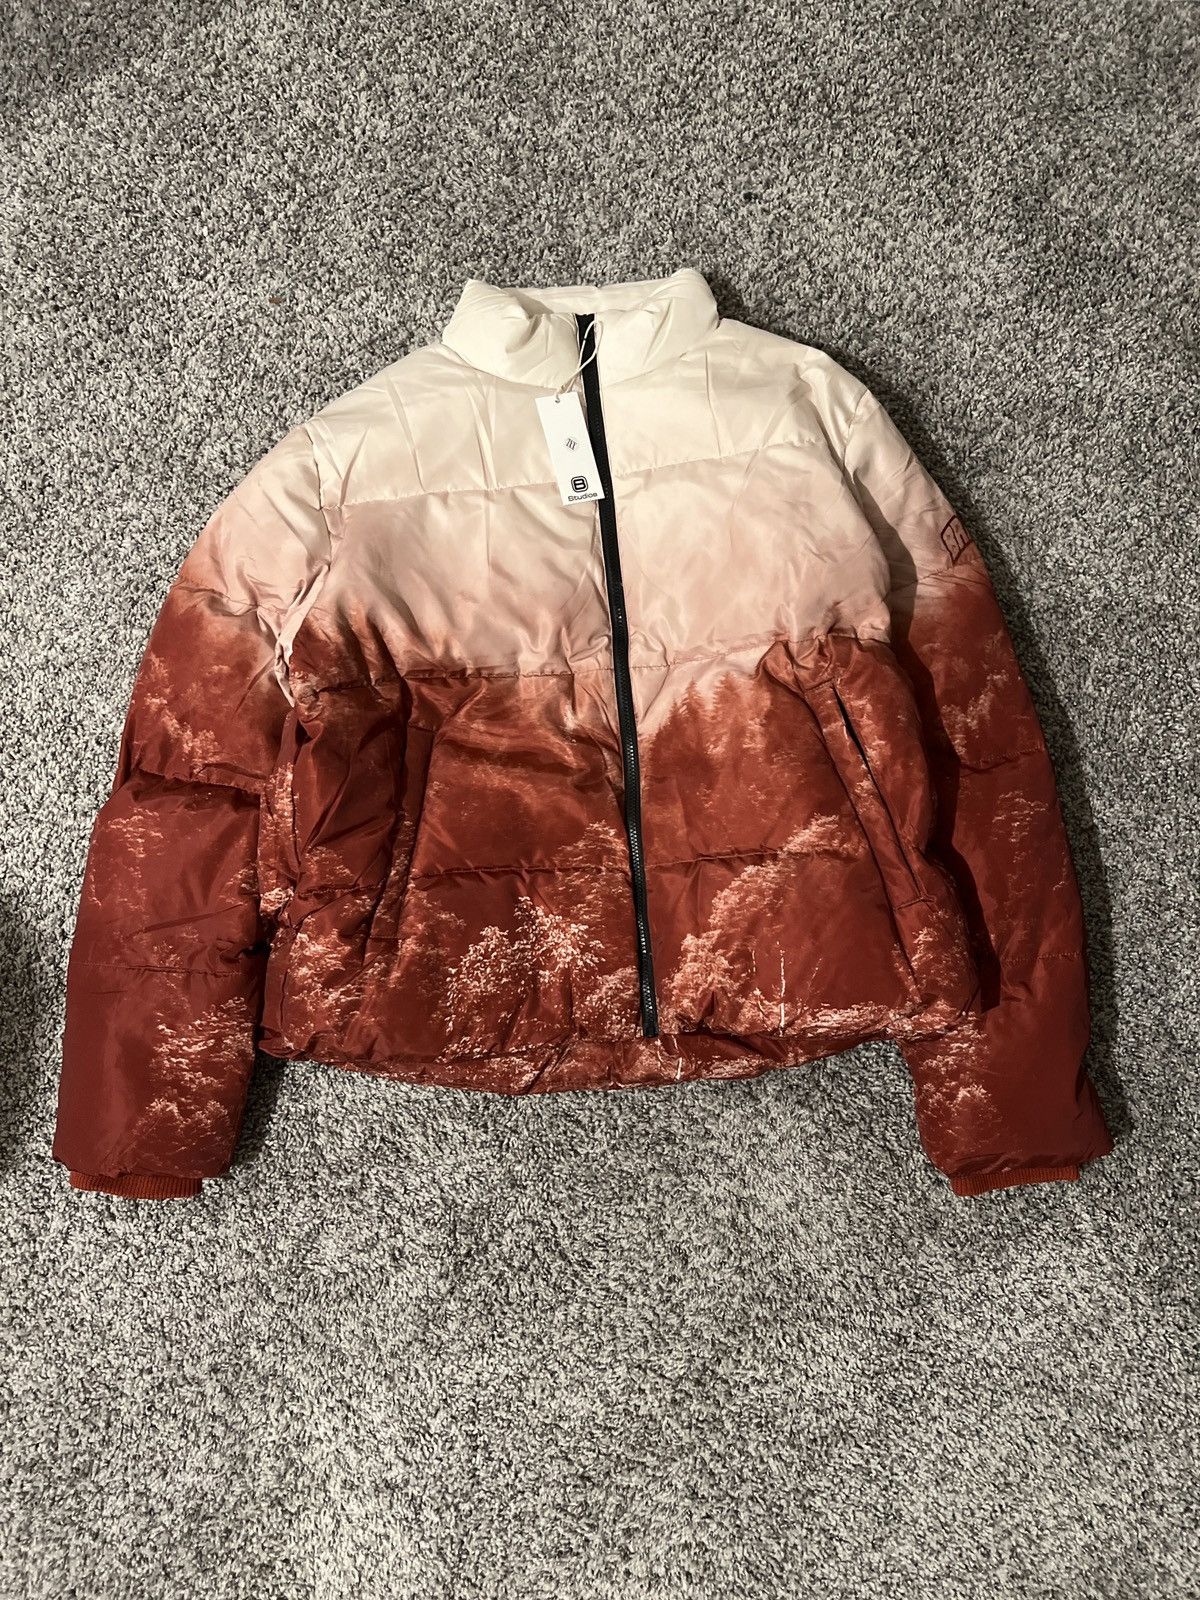 Bravest Studios Wildfire Puffer Jacket Forest Red